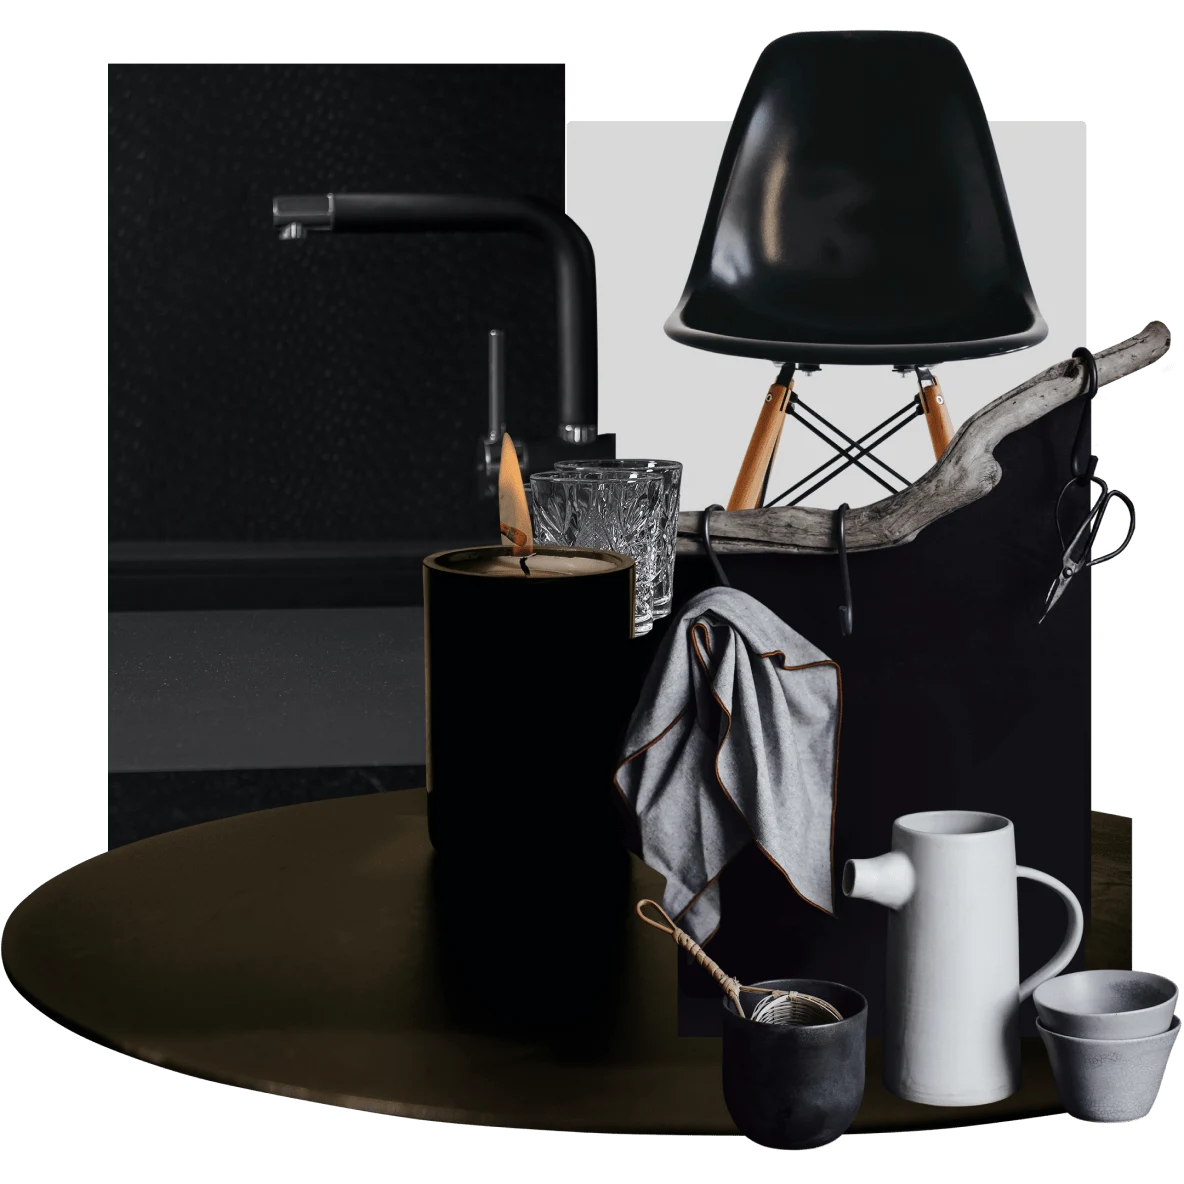 Black candle, white and grey cups on a round black table. Black office chair and black sink fixtures.